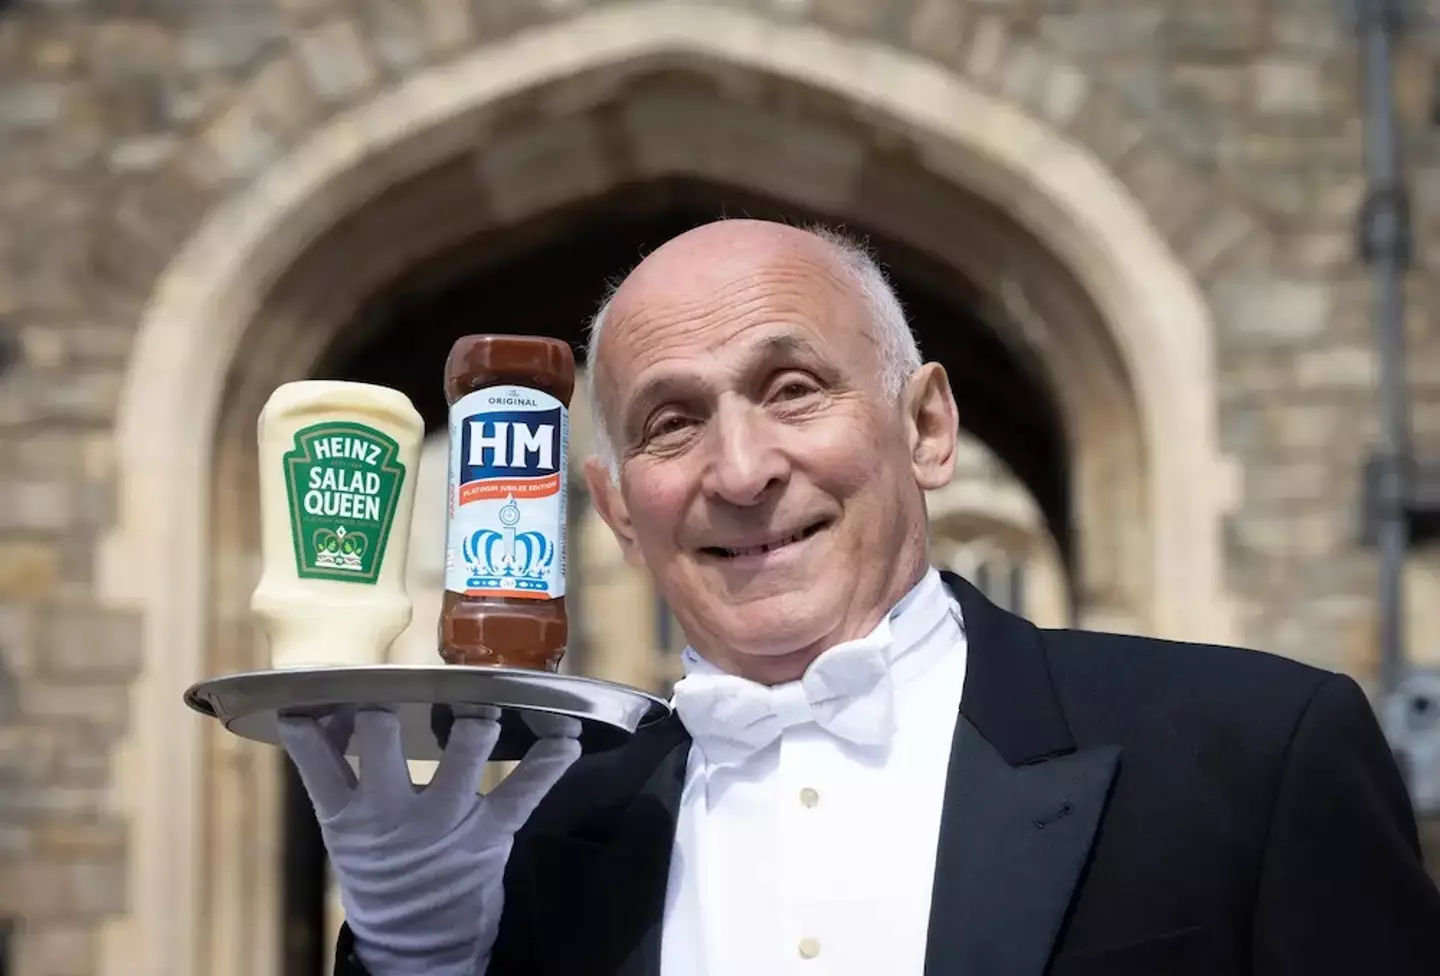 Shoppers can choose from ‘HM Sauce’ and ‘Heinz Salad Queen’.